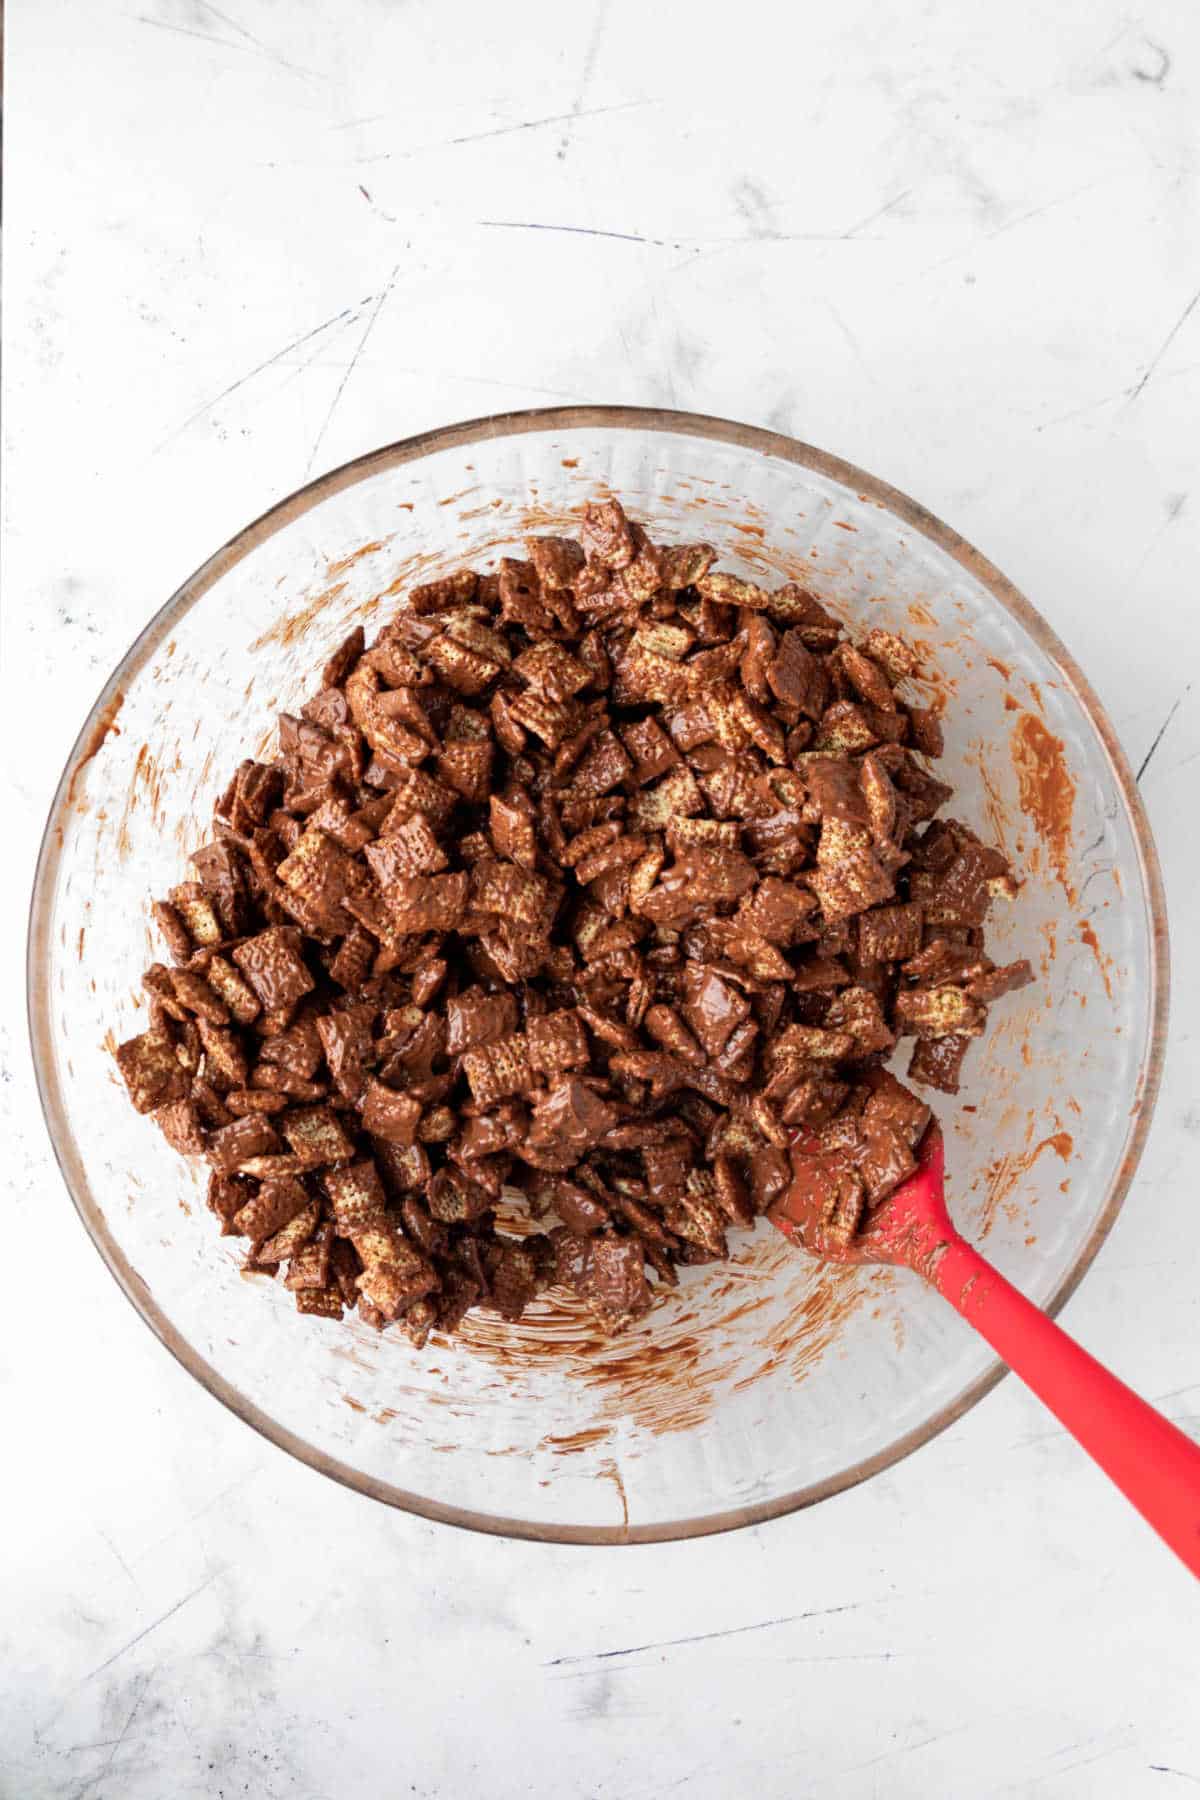 Spatula mixing peanut butter chocolate mixture into cereal. 